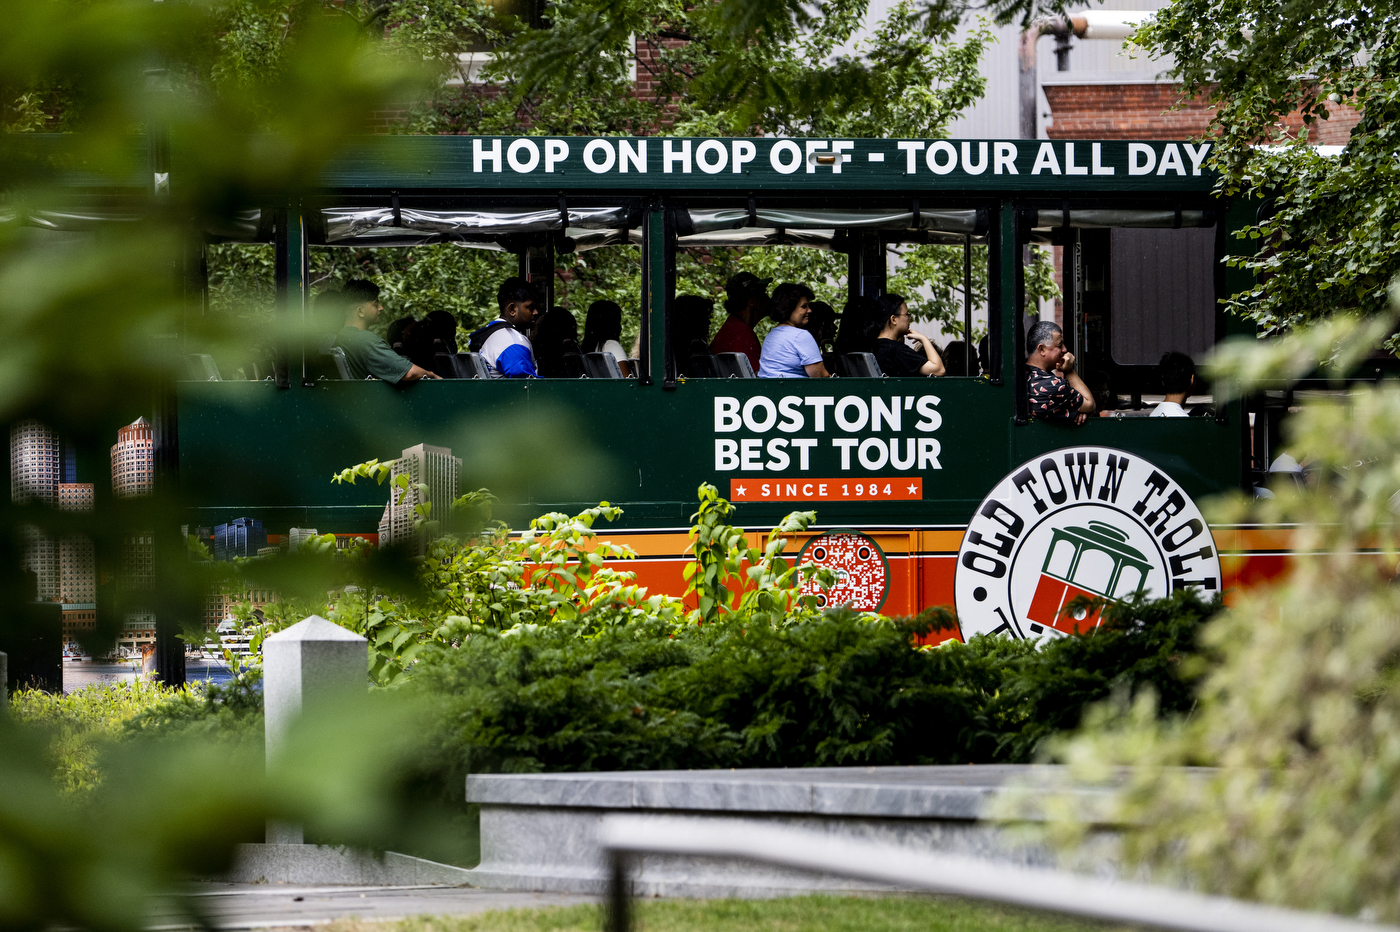 A bus riding through a city has white text over a green background: "Boston's Best Tour." 